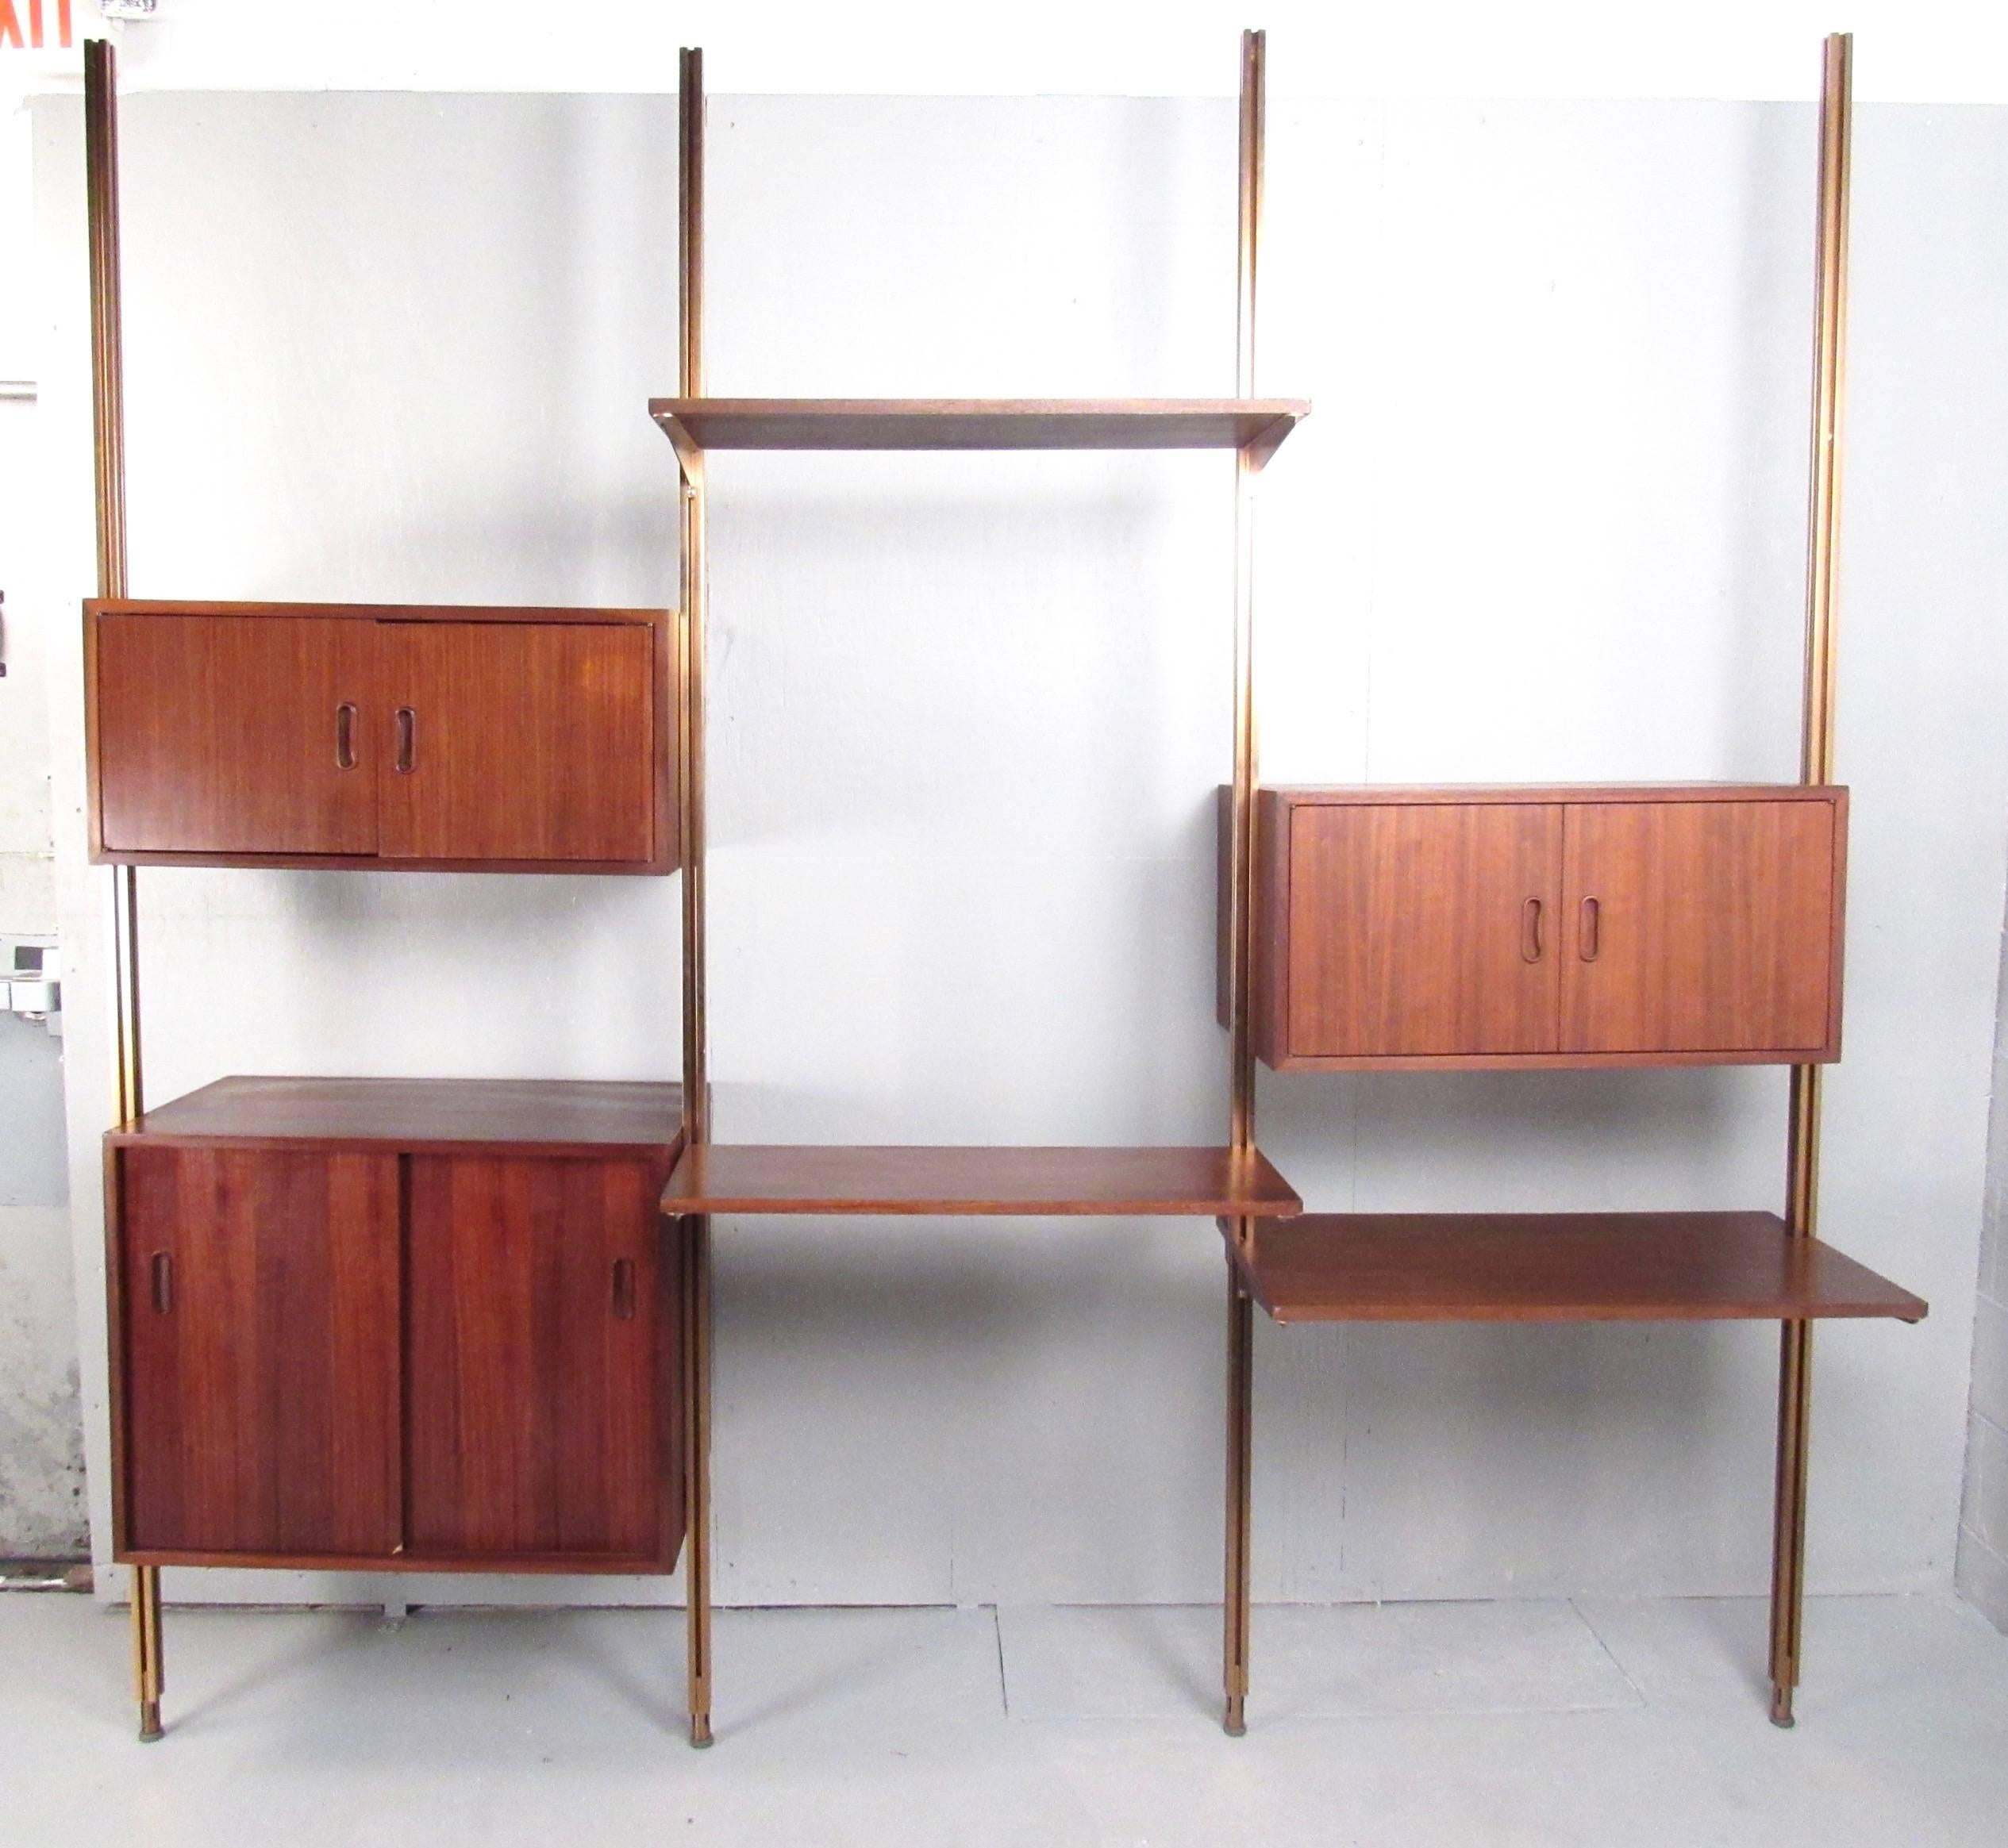 This beautiful vintage teak wall unit features modular cabinets and shelves mounted to custom metal floor supports. The orientation of the wall unit can be customized to your specifications, but unit's must be mounted to the wall as well. Carved